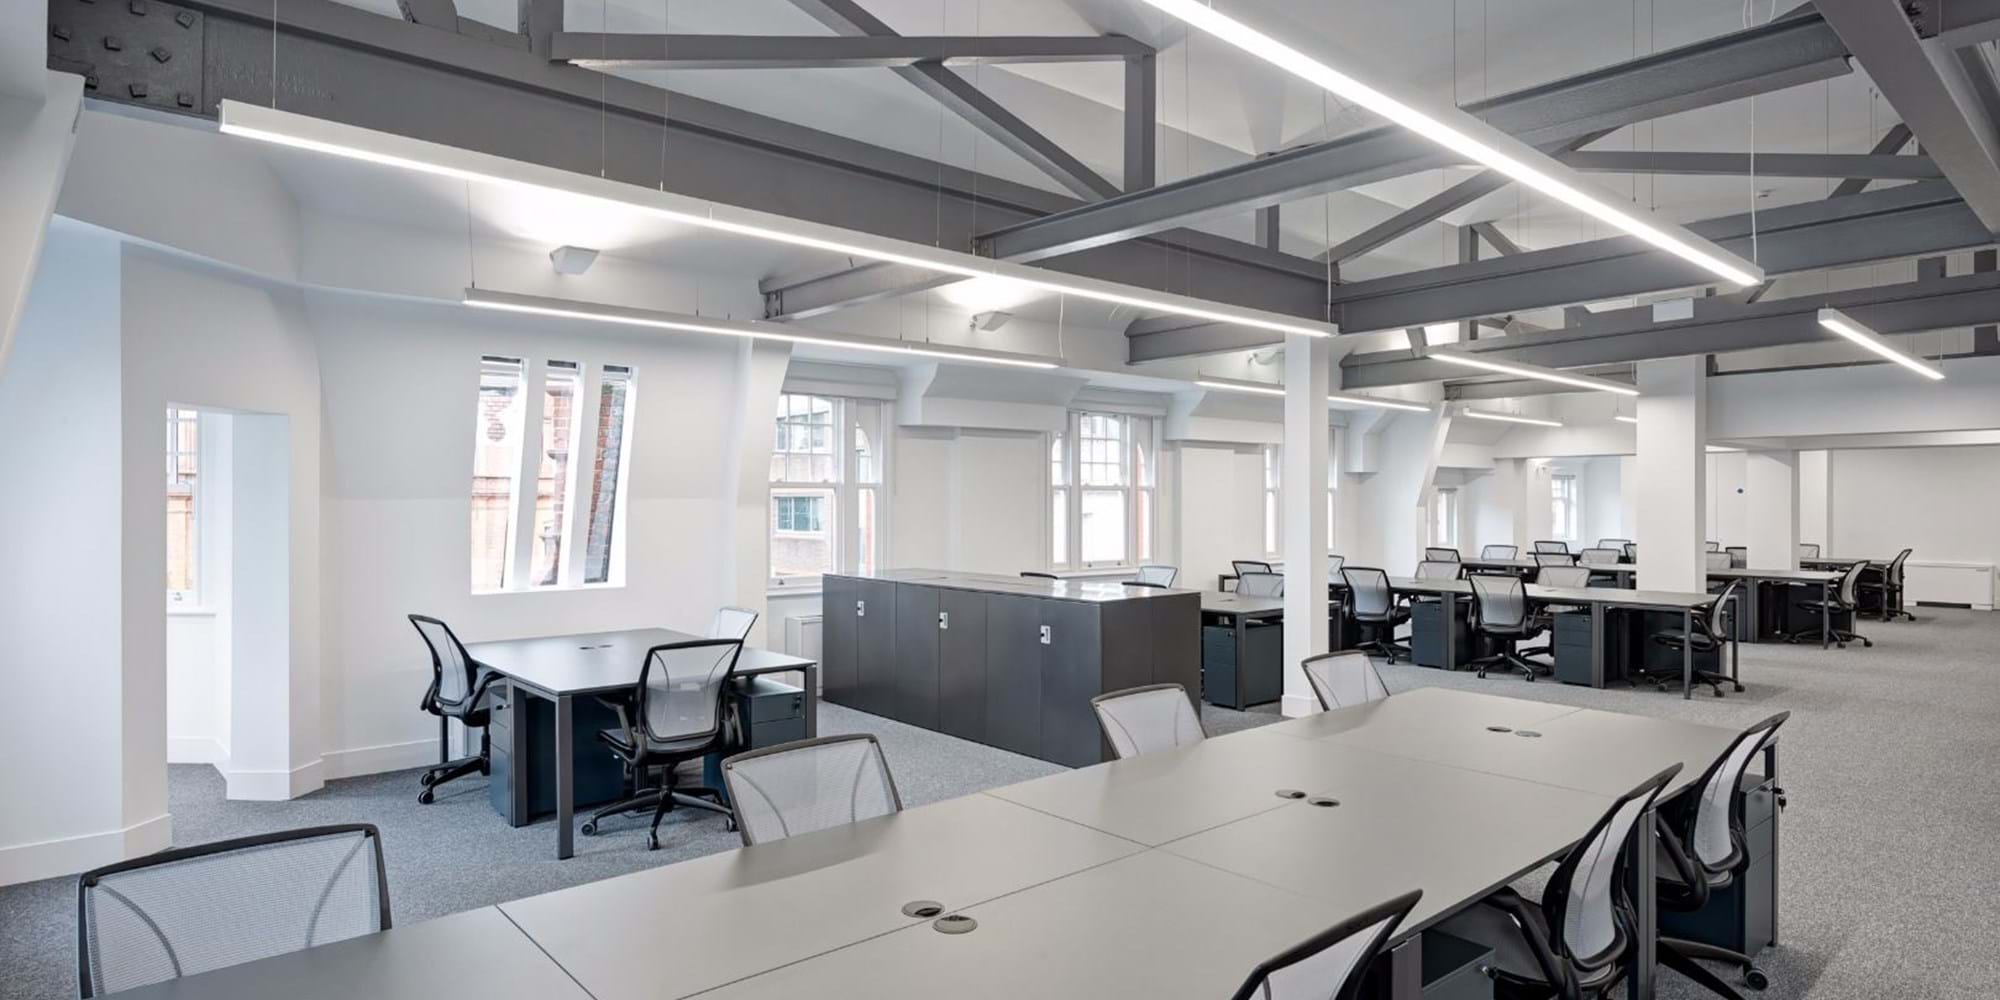 Modus Workspace office design, fit out and refurbishment - TOG - Wimpole Street - TOG Wimpole St 24 highres sRGB.jpg